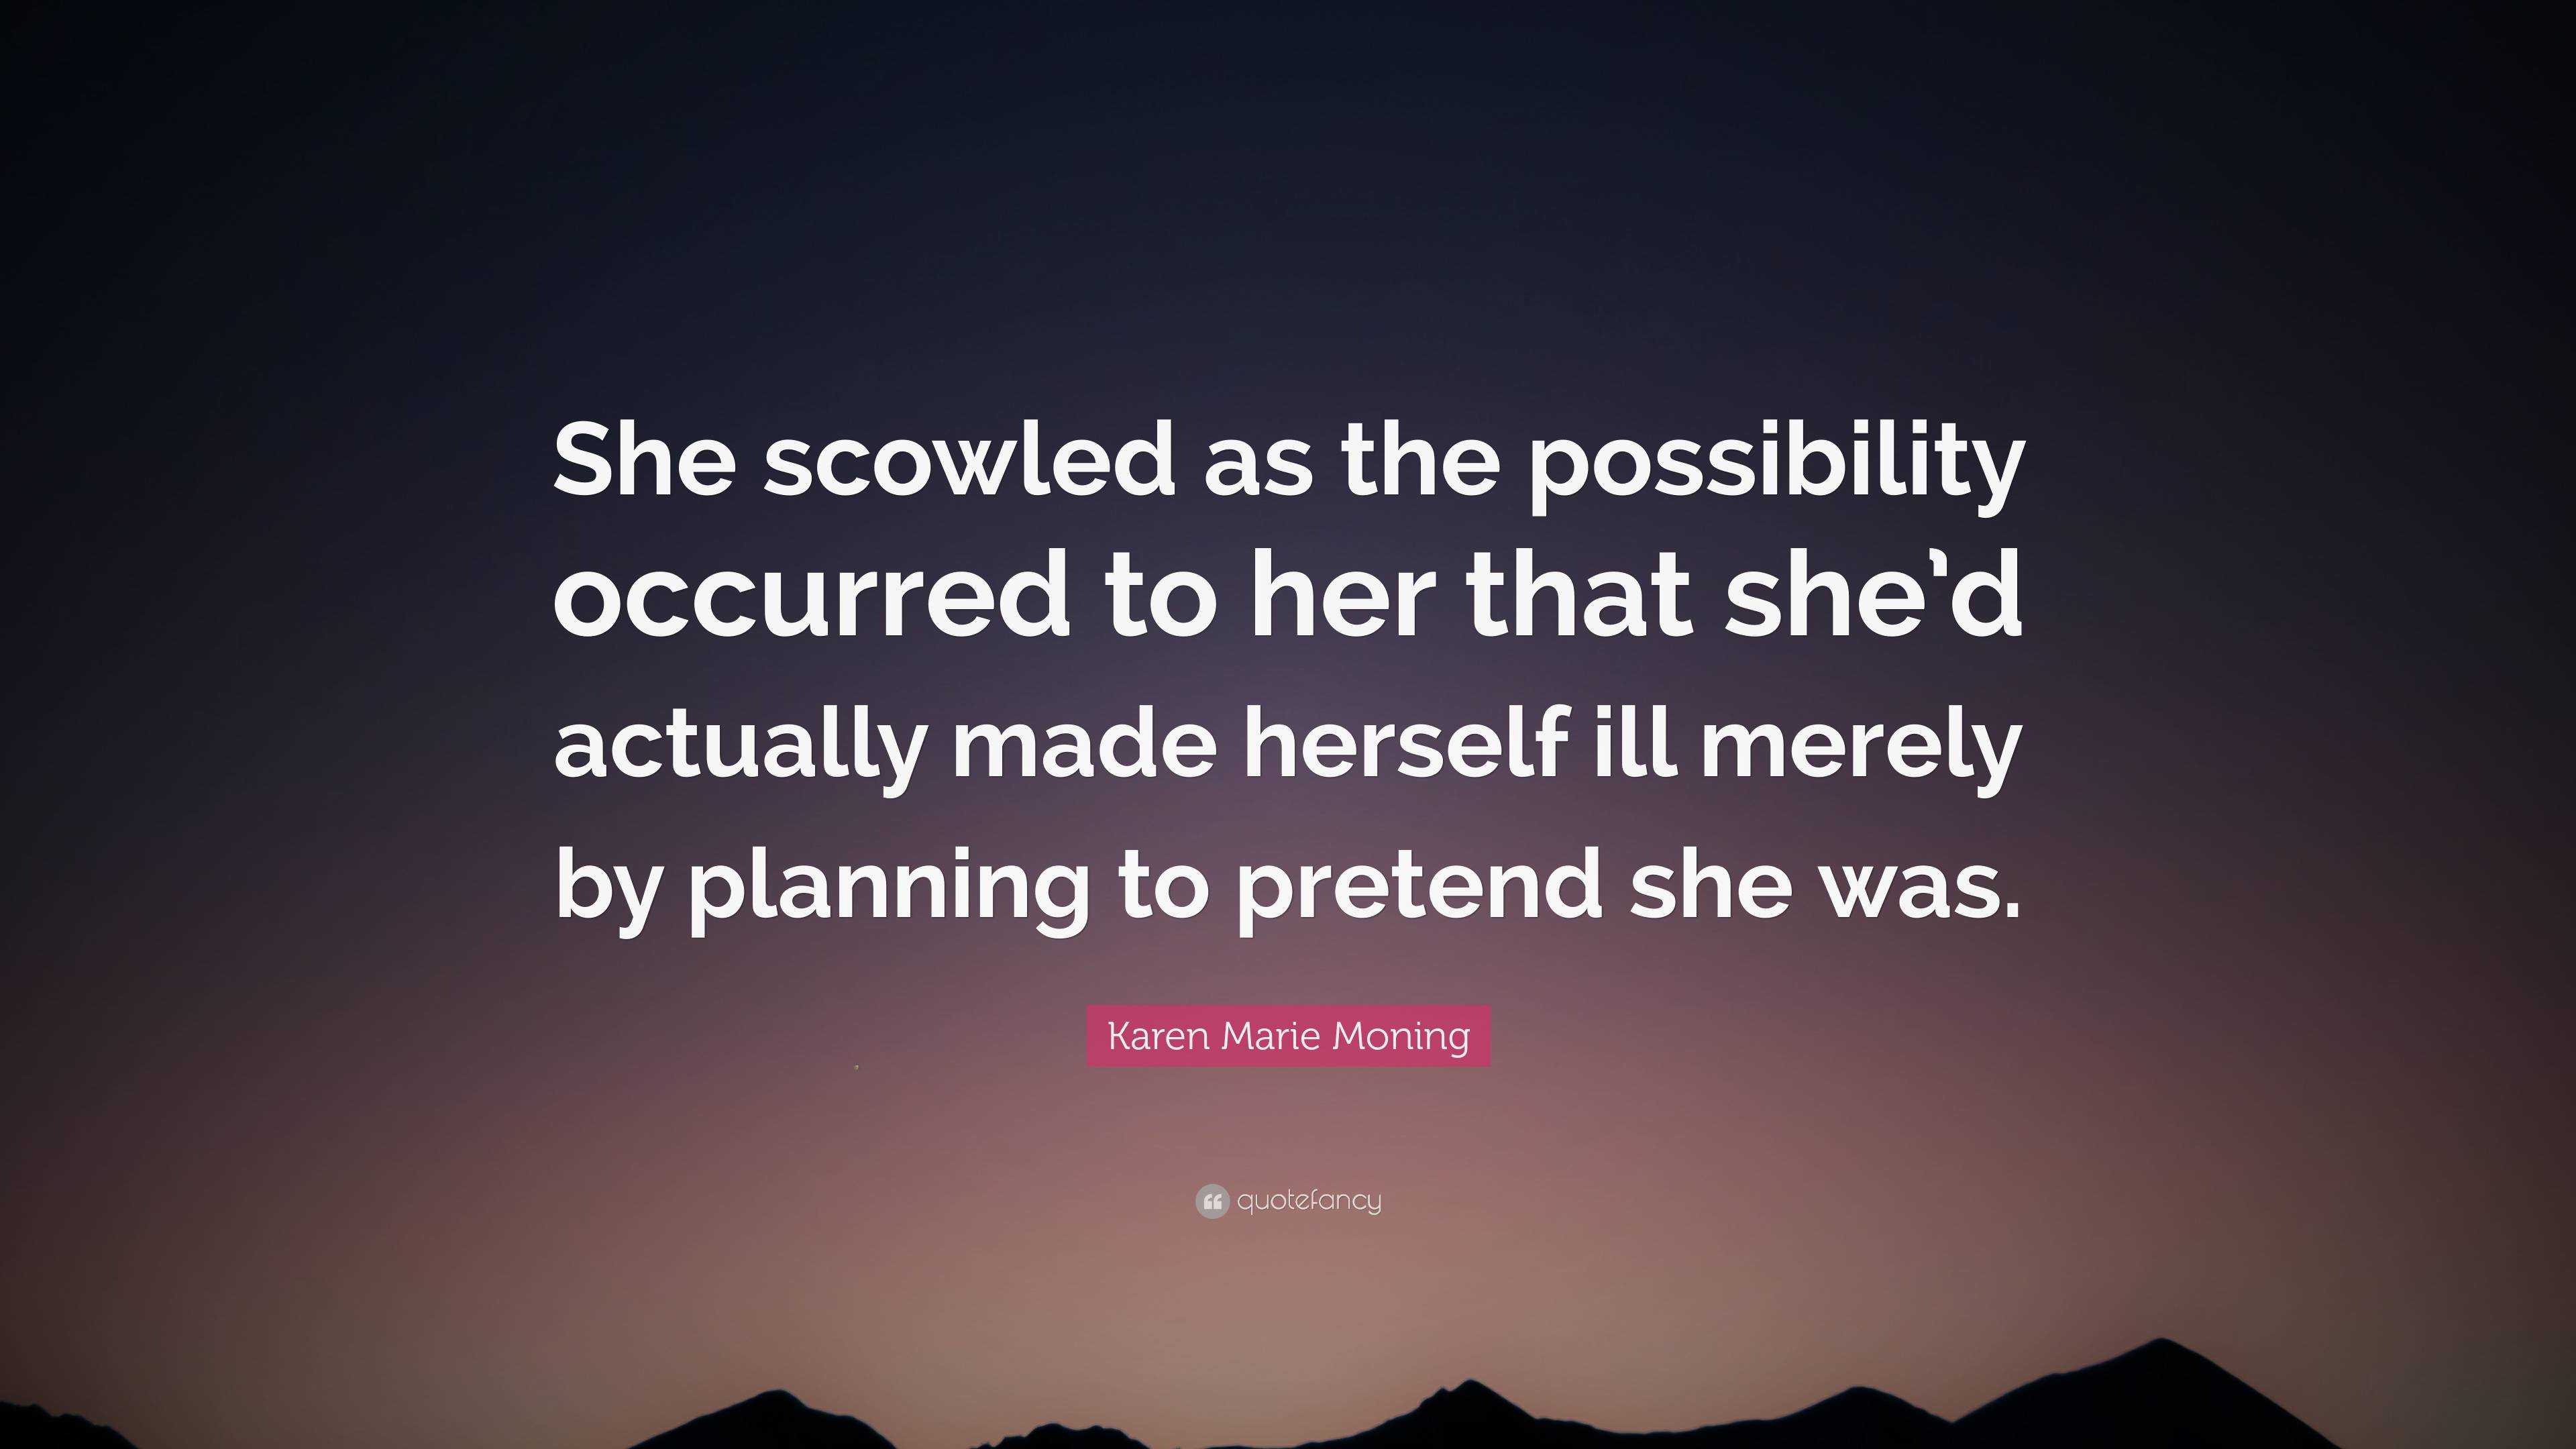 Karen Marie Moning Quote: “She scowled as the possibility occurred to ...